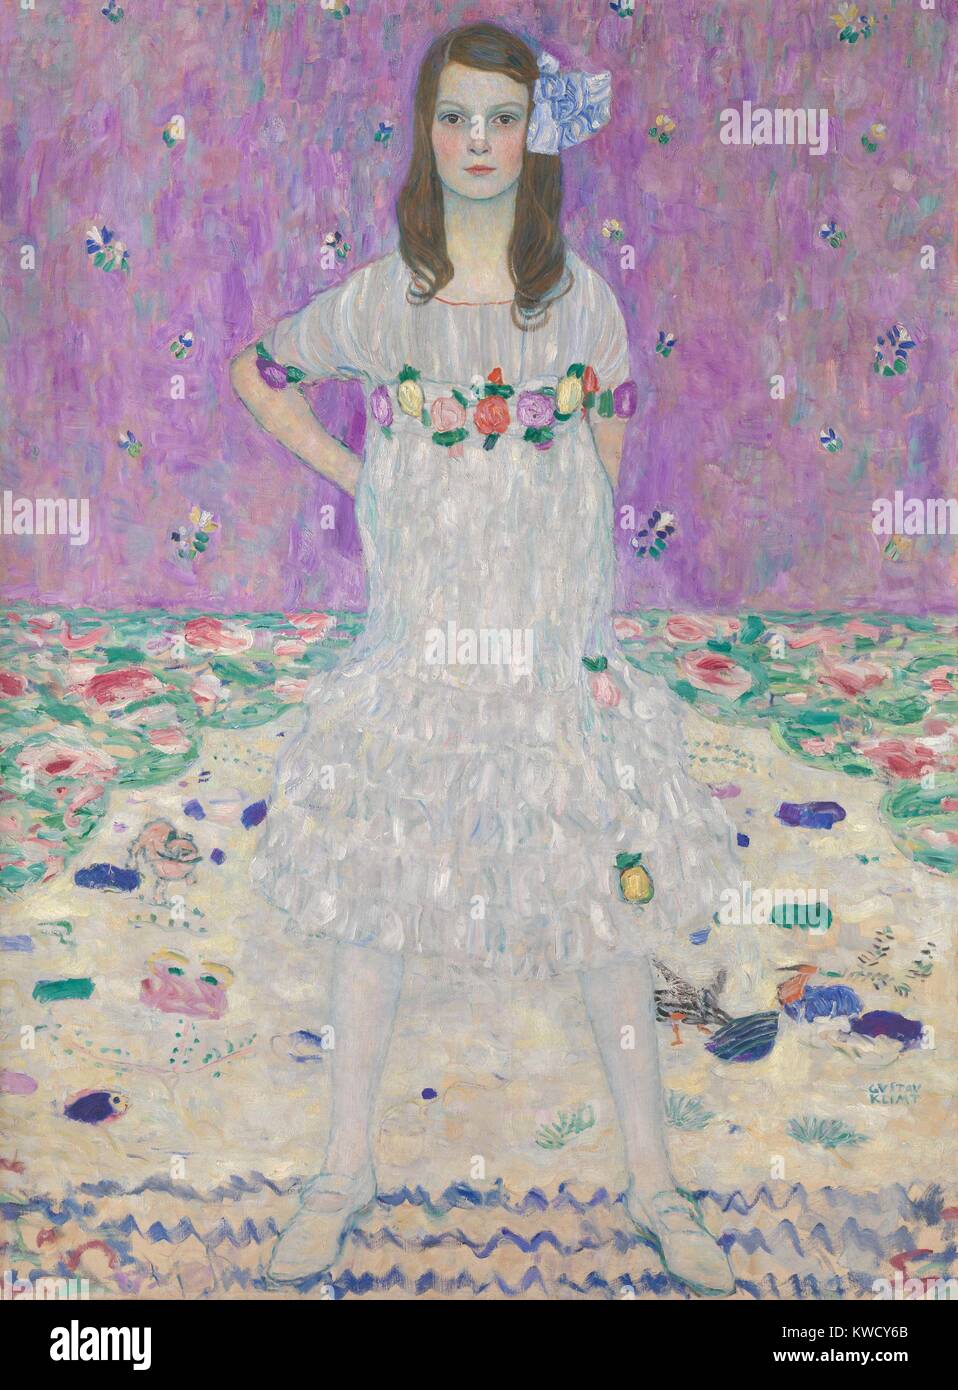 Mada Primavesi, by Gustav Klimt, 1912-13, Austrian Symbolist painting, oil on canvas. This portrait depicts a nine-year-old girl, standing before pastel colored patterns. Her parents were Otto and Eugenia Primavesi, patrons of progressive Viennese arts (BSLOC 2017 5 128) Stock Photo